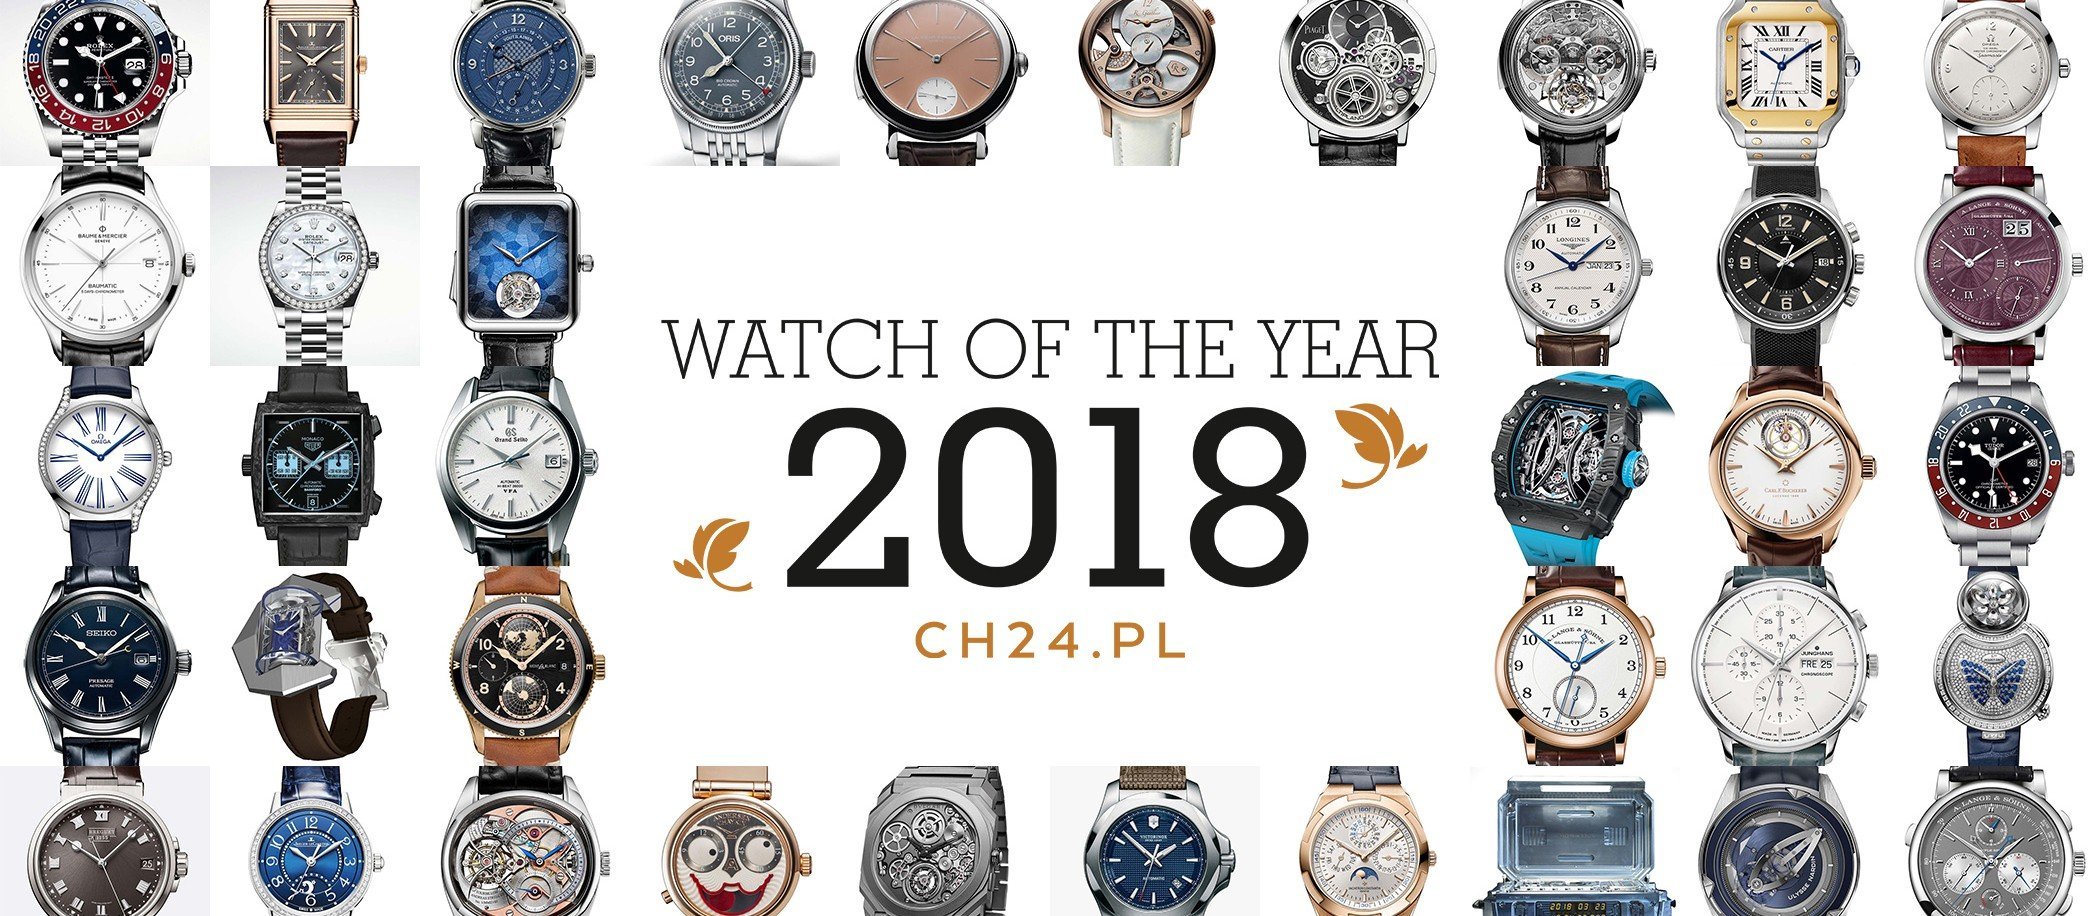 WATCH OF THE YEAR 2018